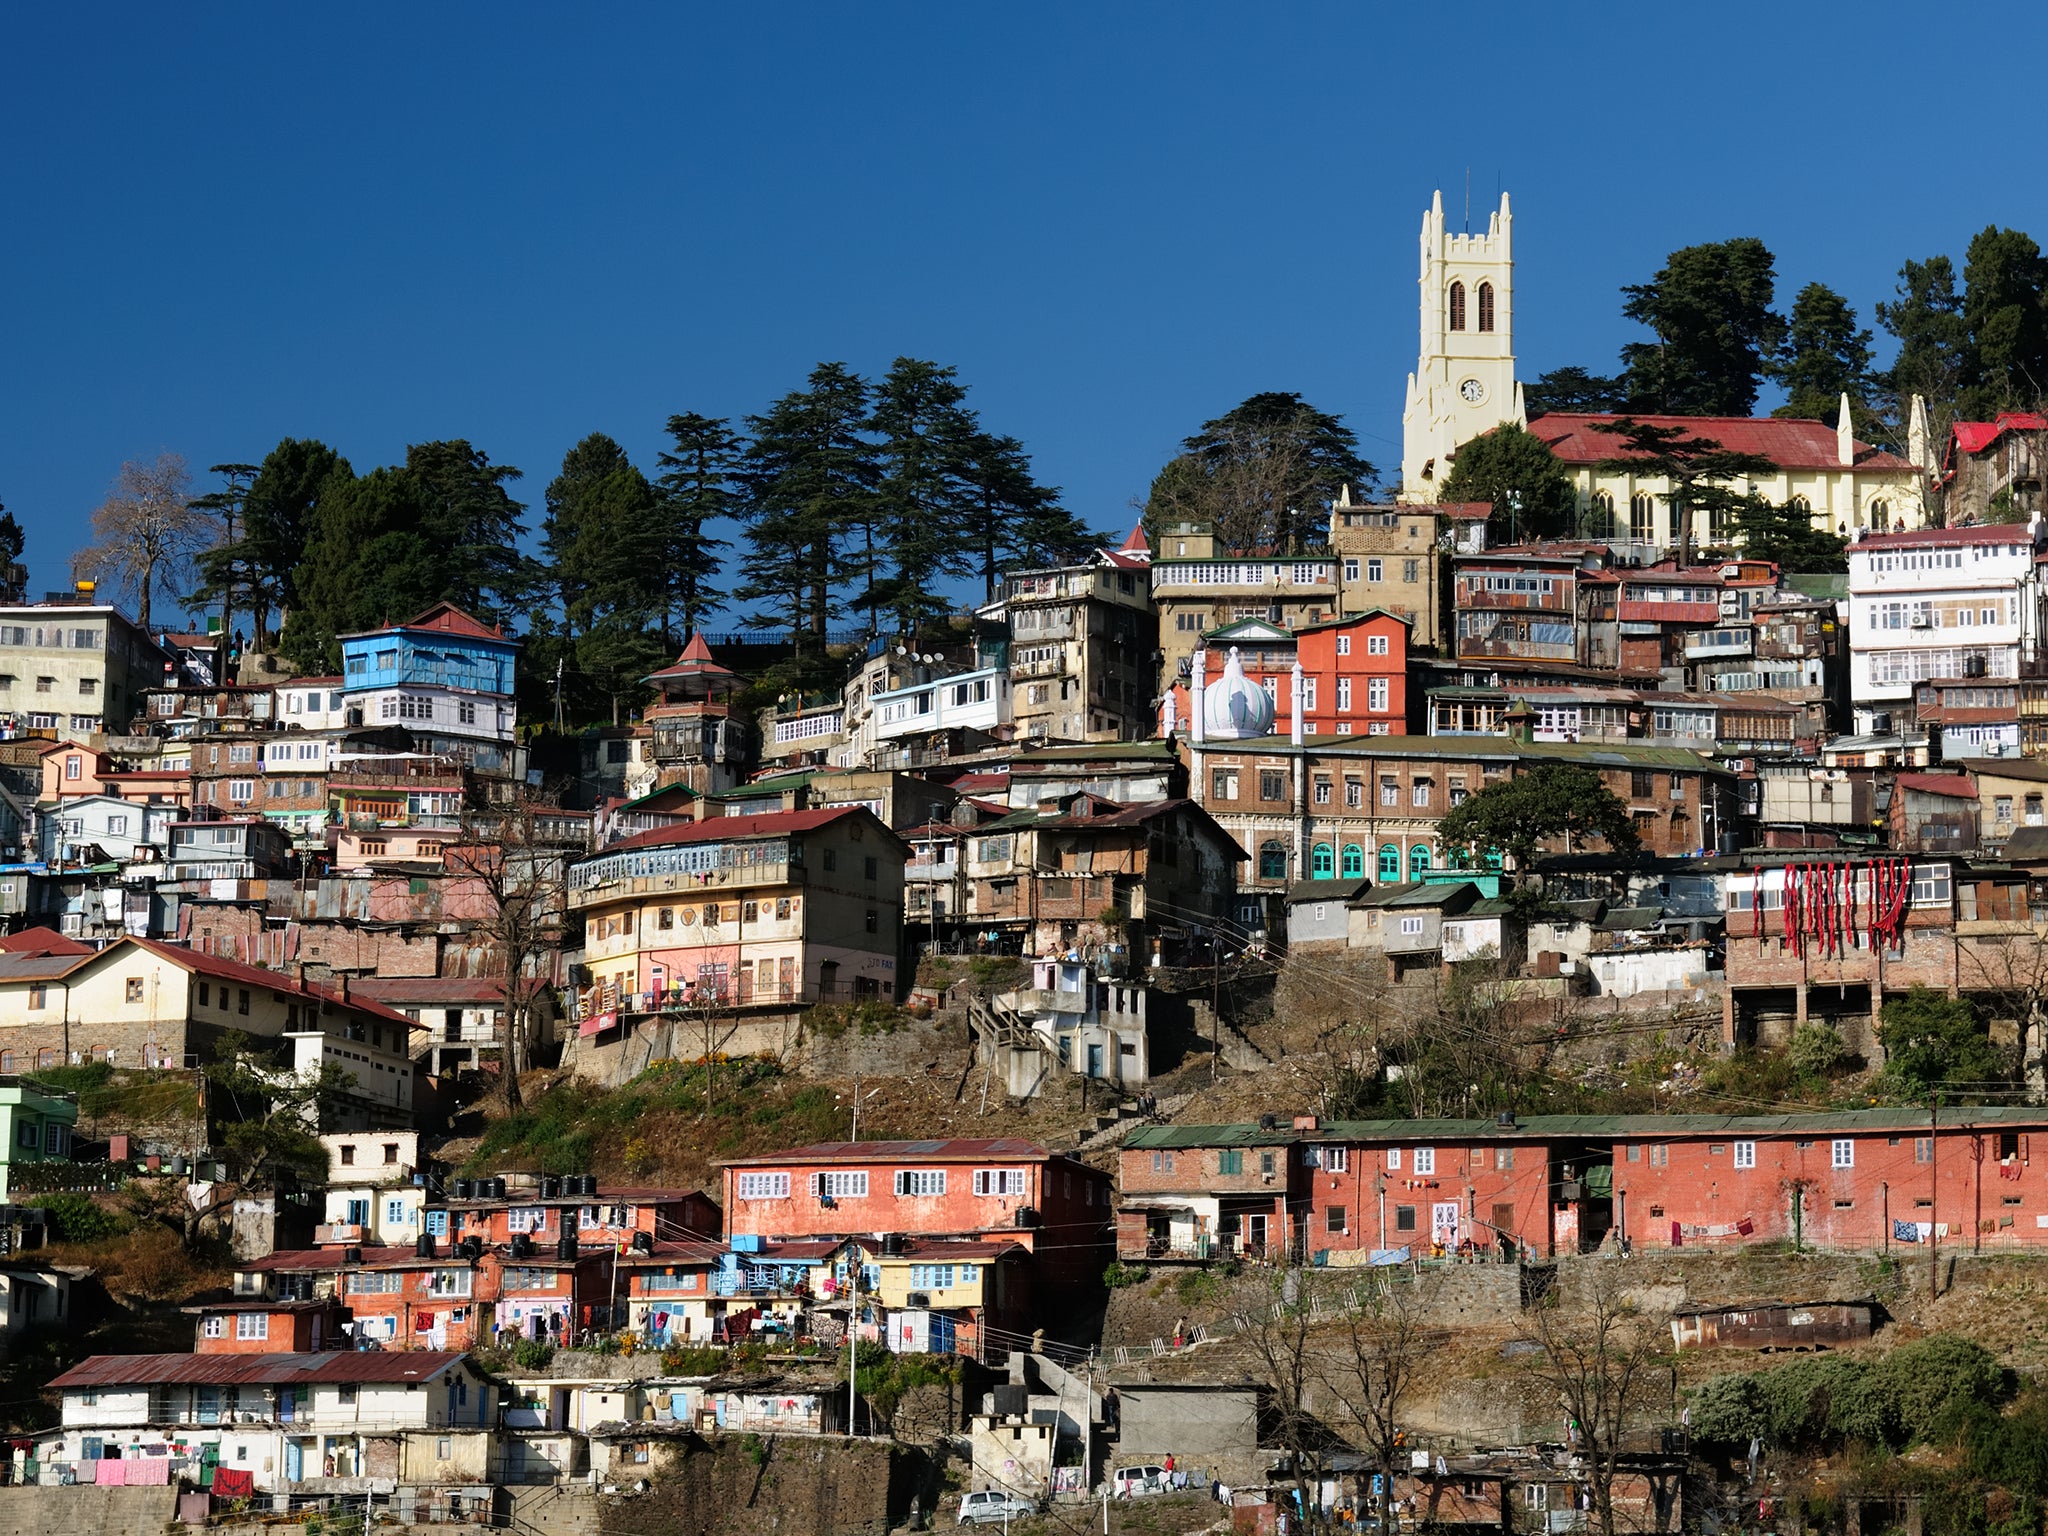 Rooms with a view: The Himalayan town of Shimla embraces a variety of architectural styles